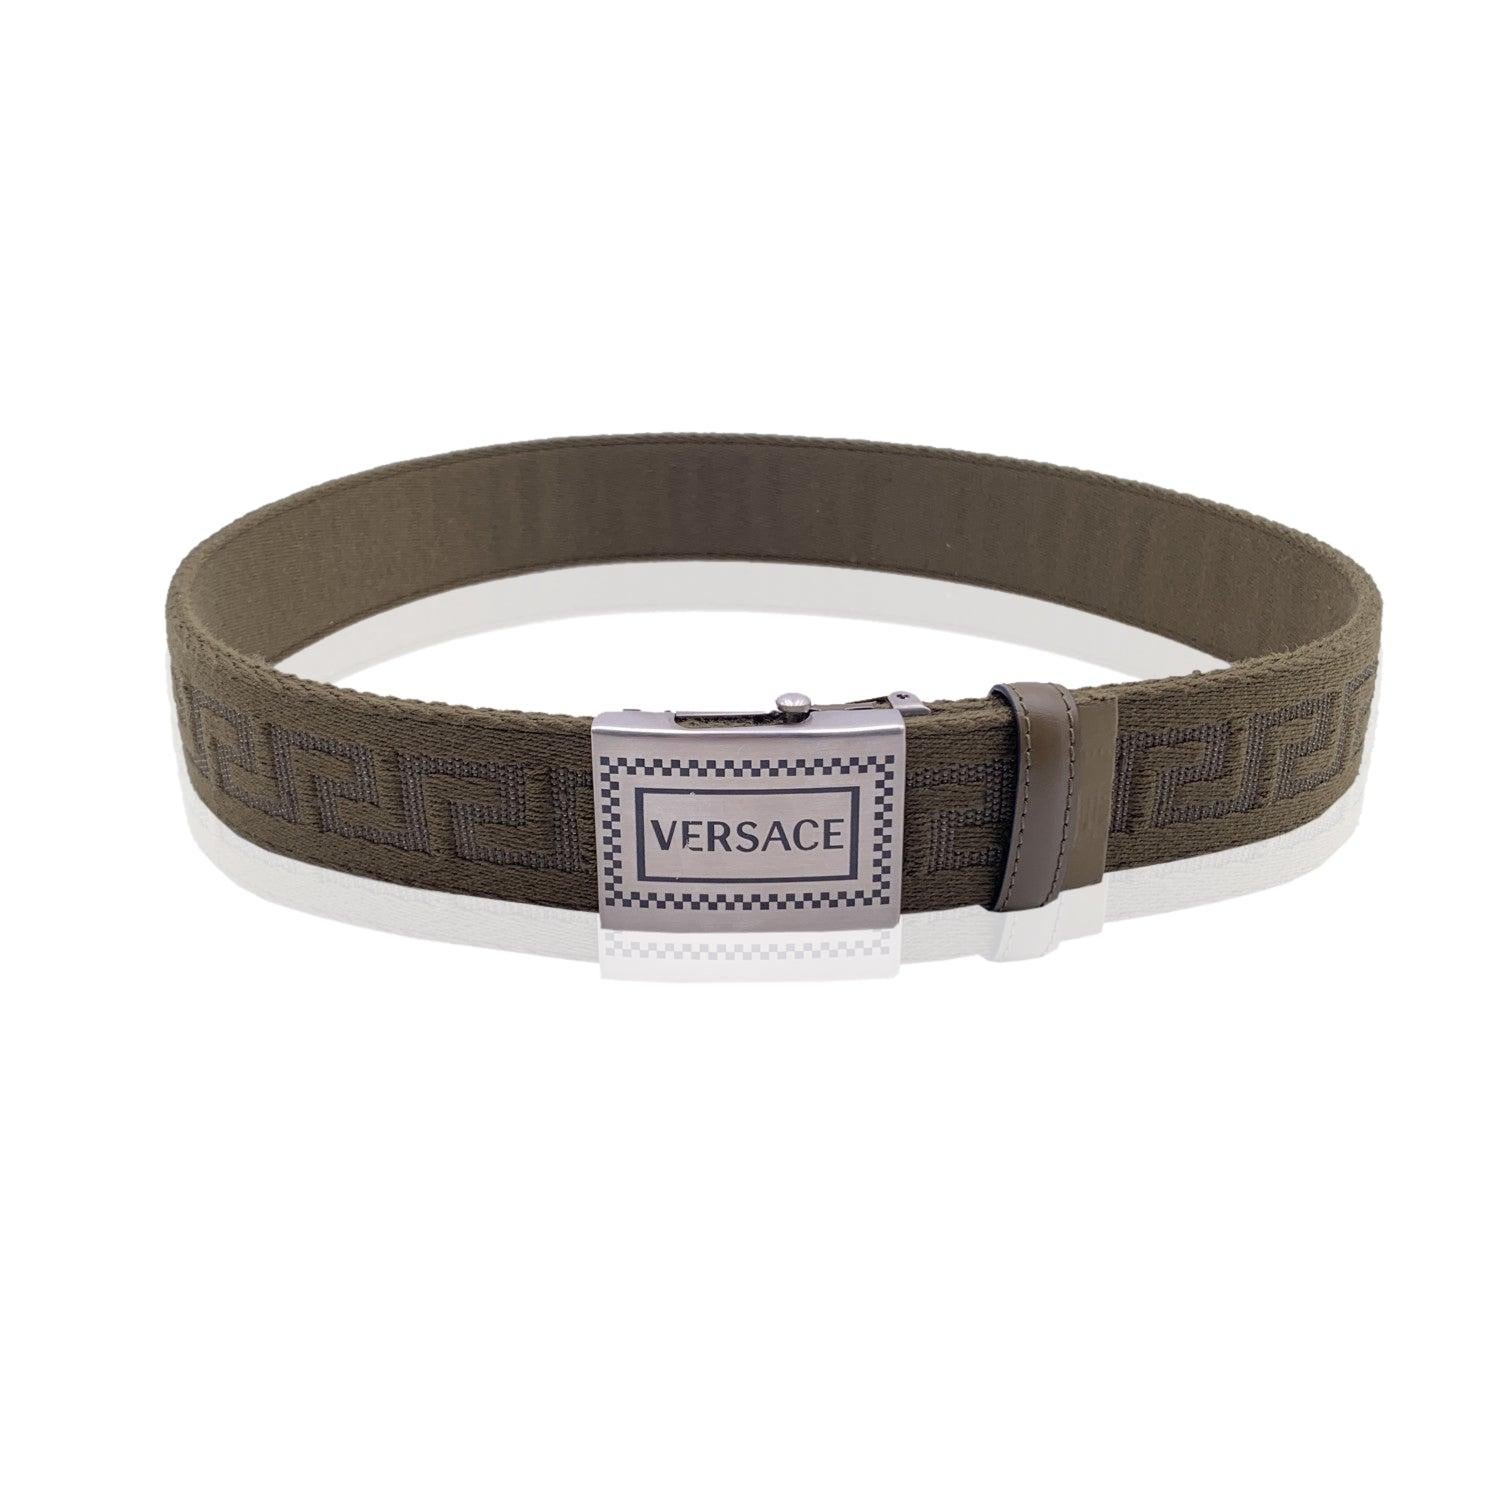 MOSCHINO REDWALL I FEEL GREAT LEATHER BELT (SIZE 42) - CRTBLNCHSHP